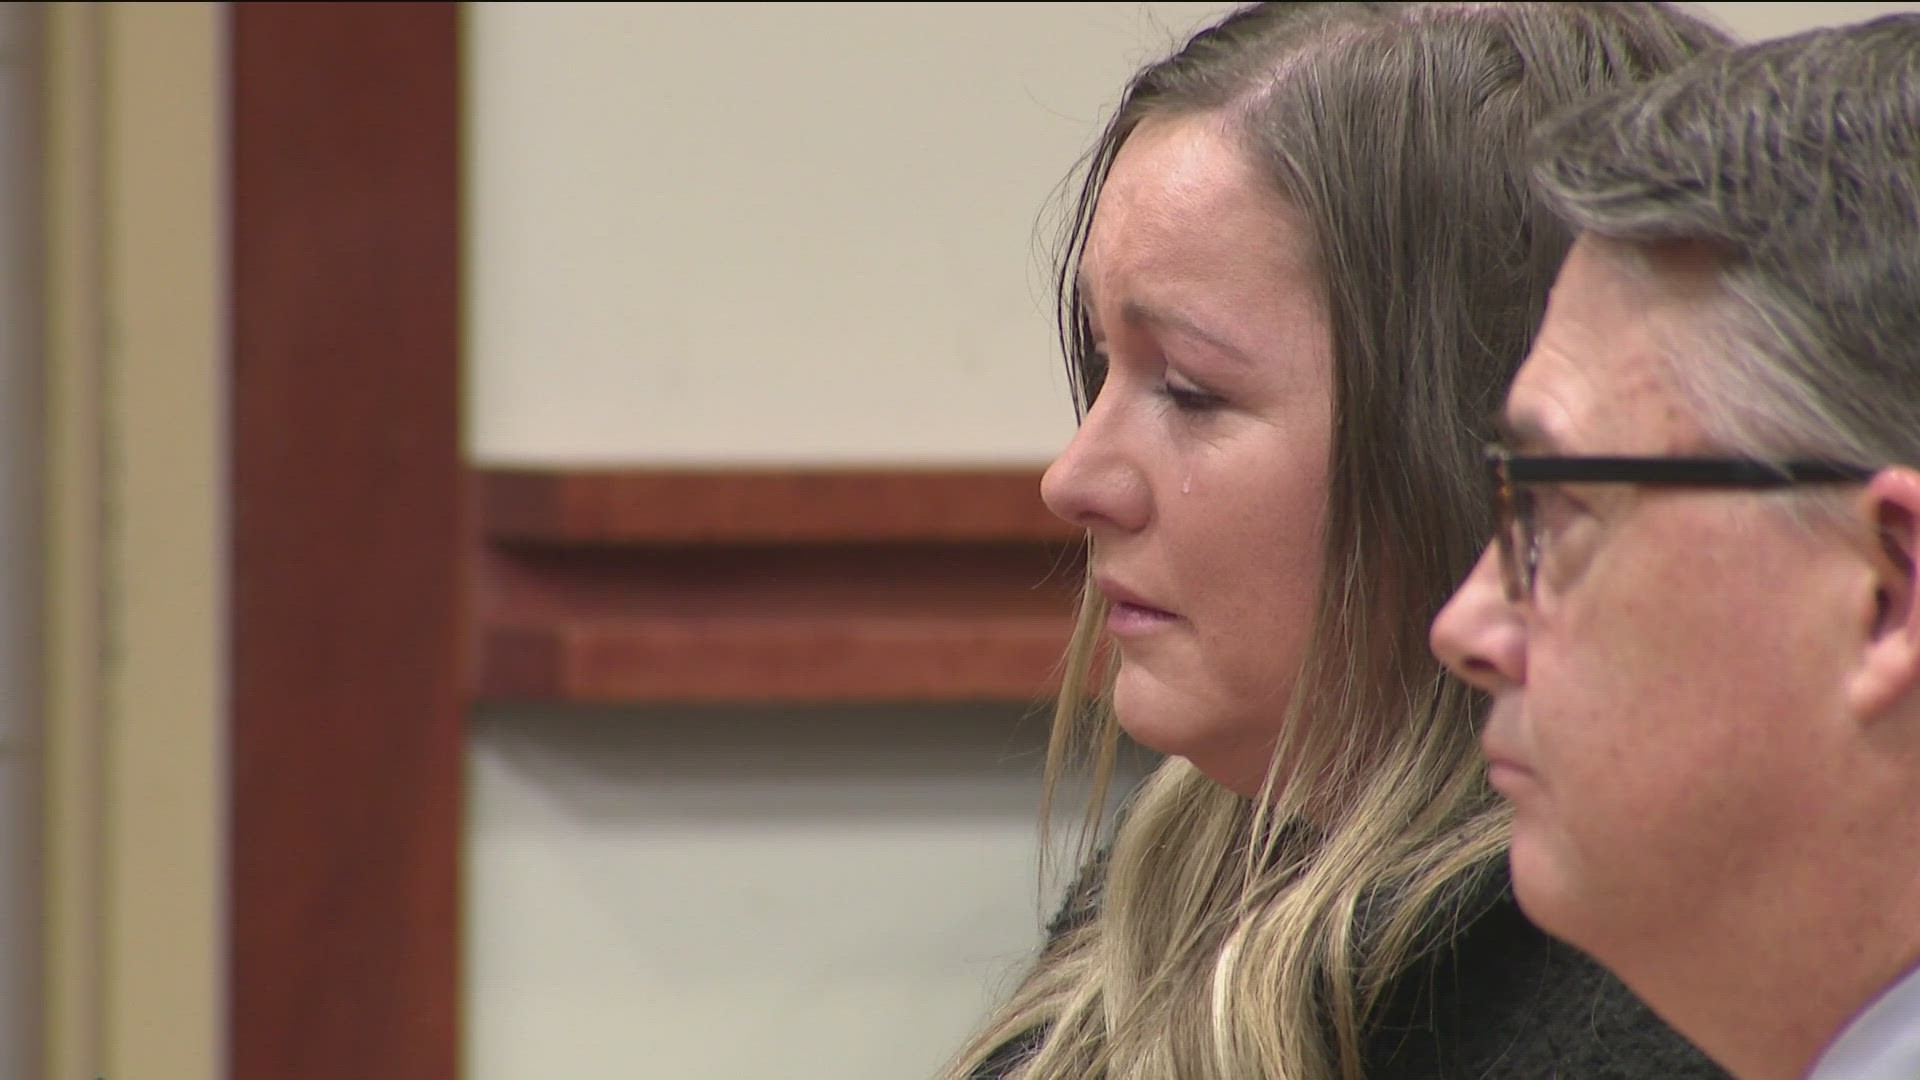 Natalie Hodson, 39, was scheduled to go to trial in February, but changed her plea to guilty Thursday to hitting and killing Kristina Rowley in 2022.